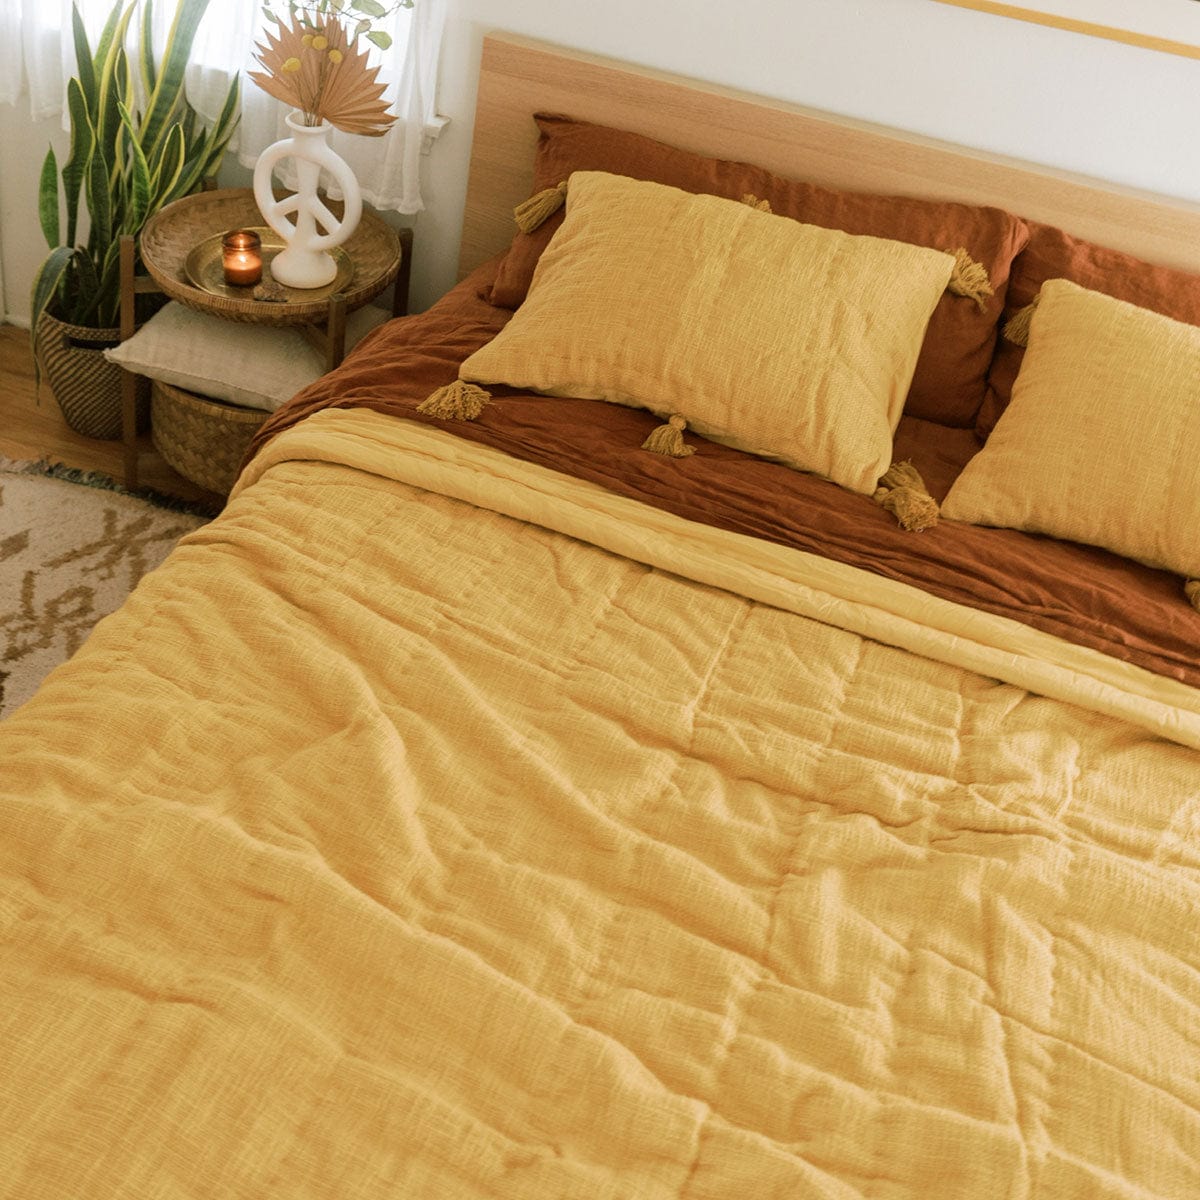 Sol Natural Dyed Quilt in Marigold by Like a Lion